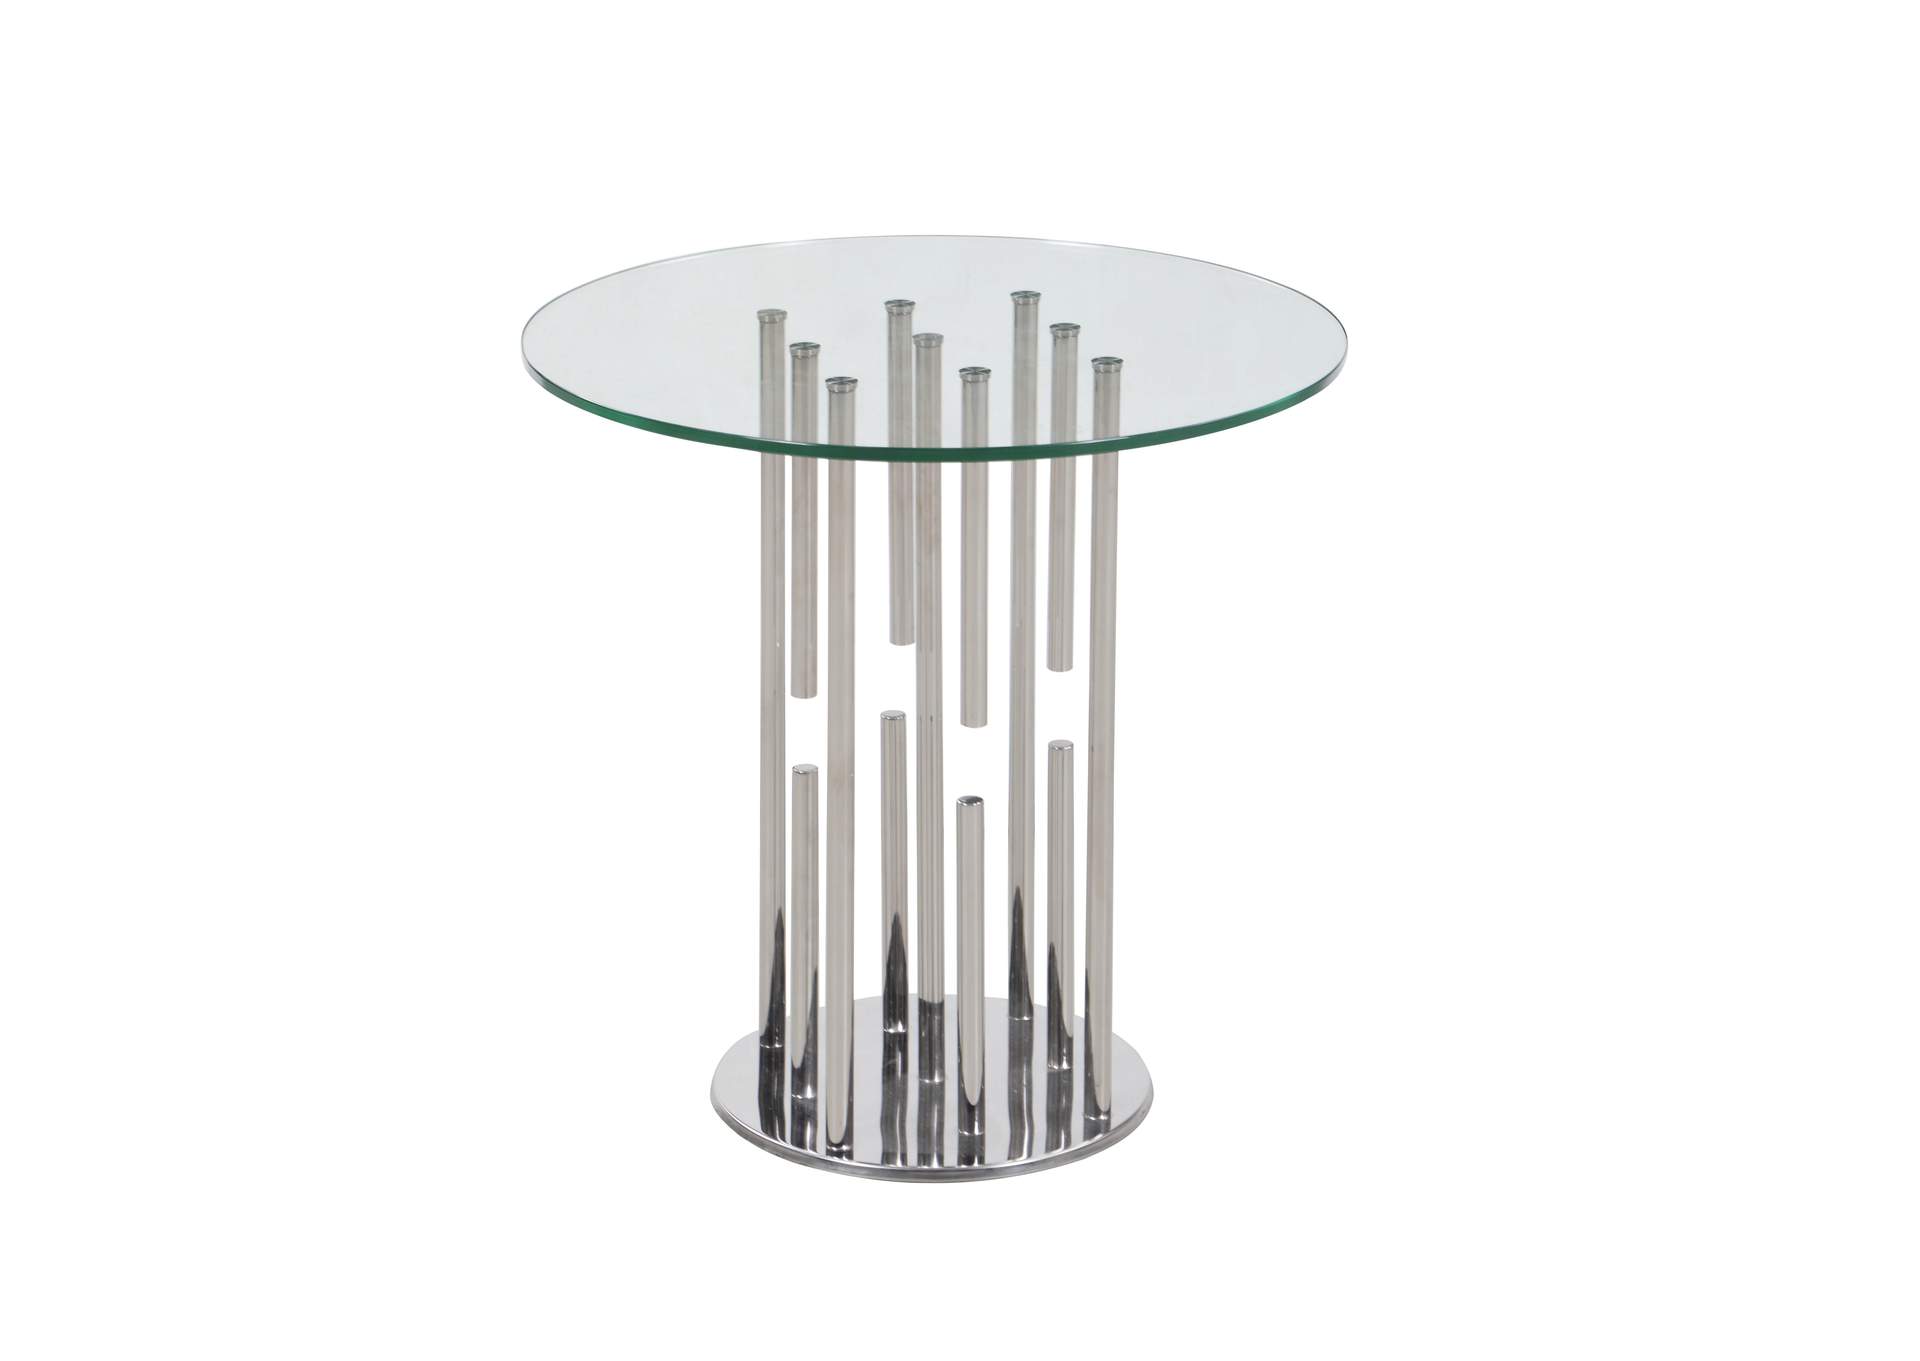 Contemporary Floating Pedestal Lamp Table,Chintaly Imports